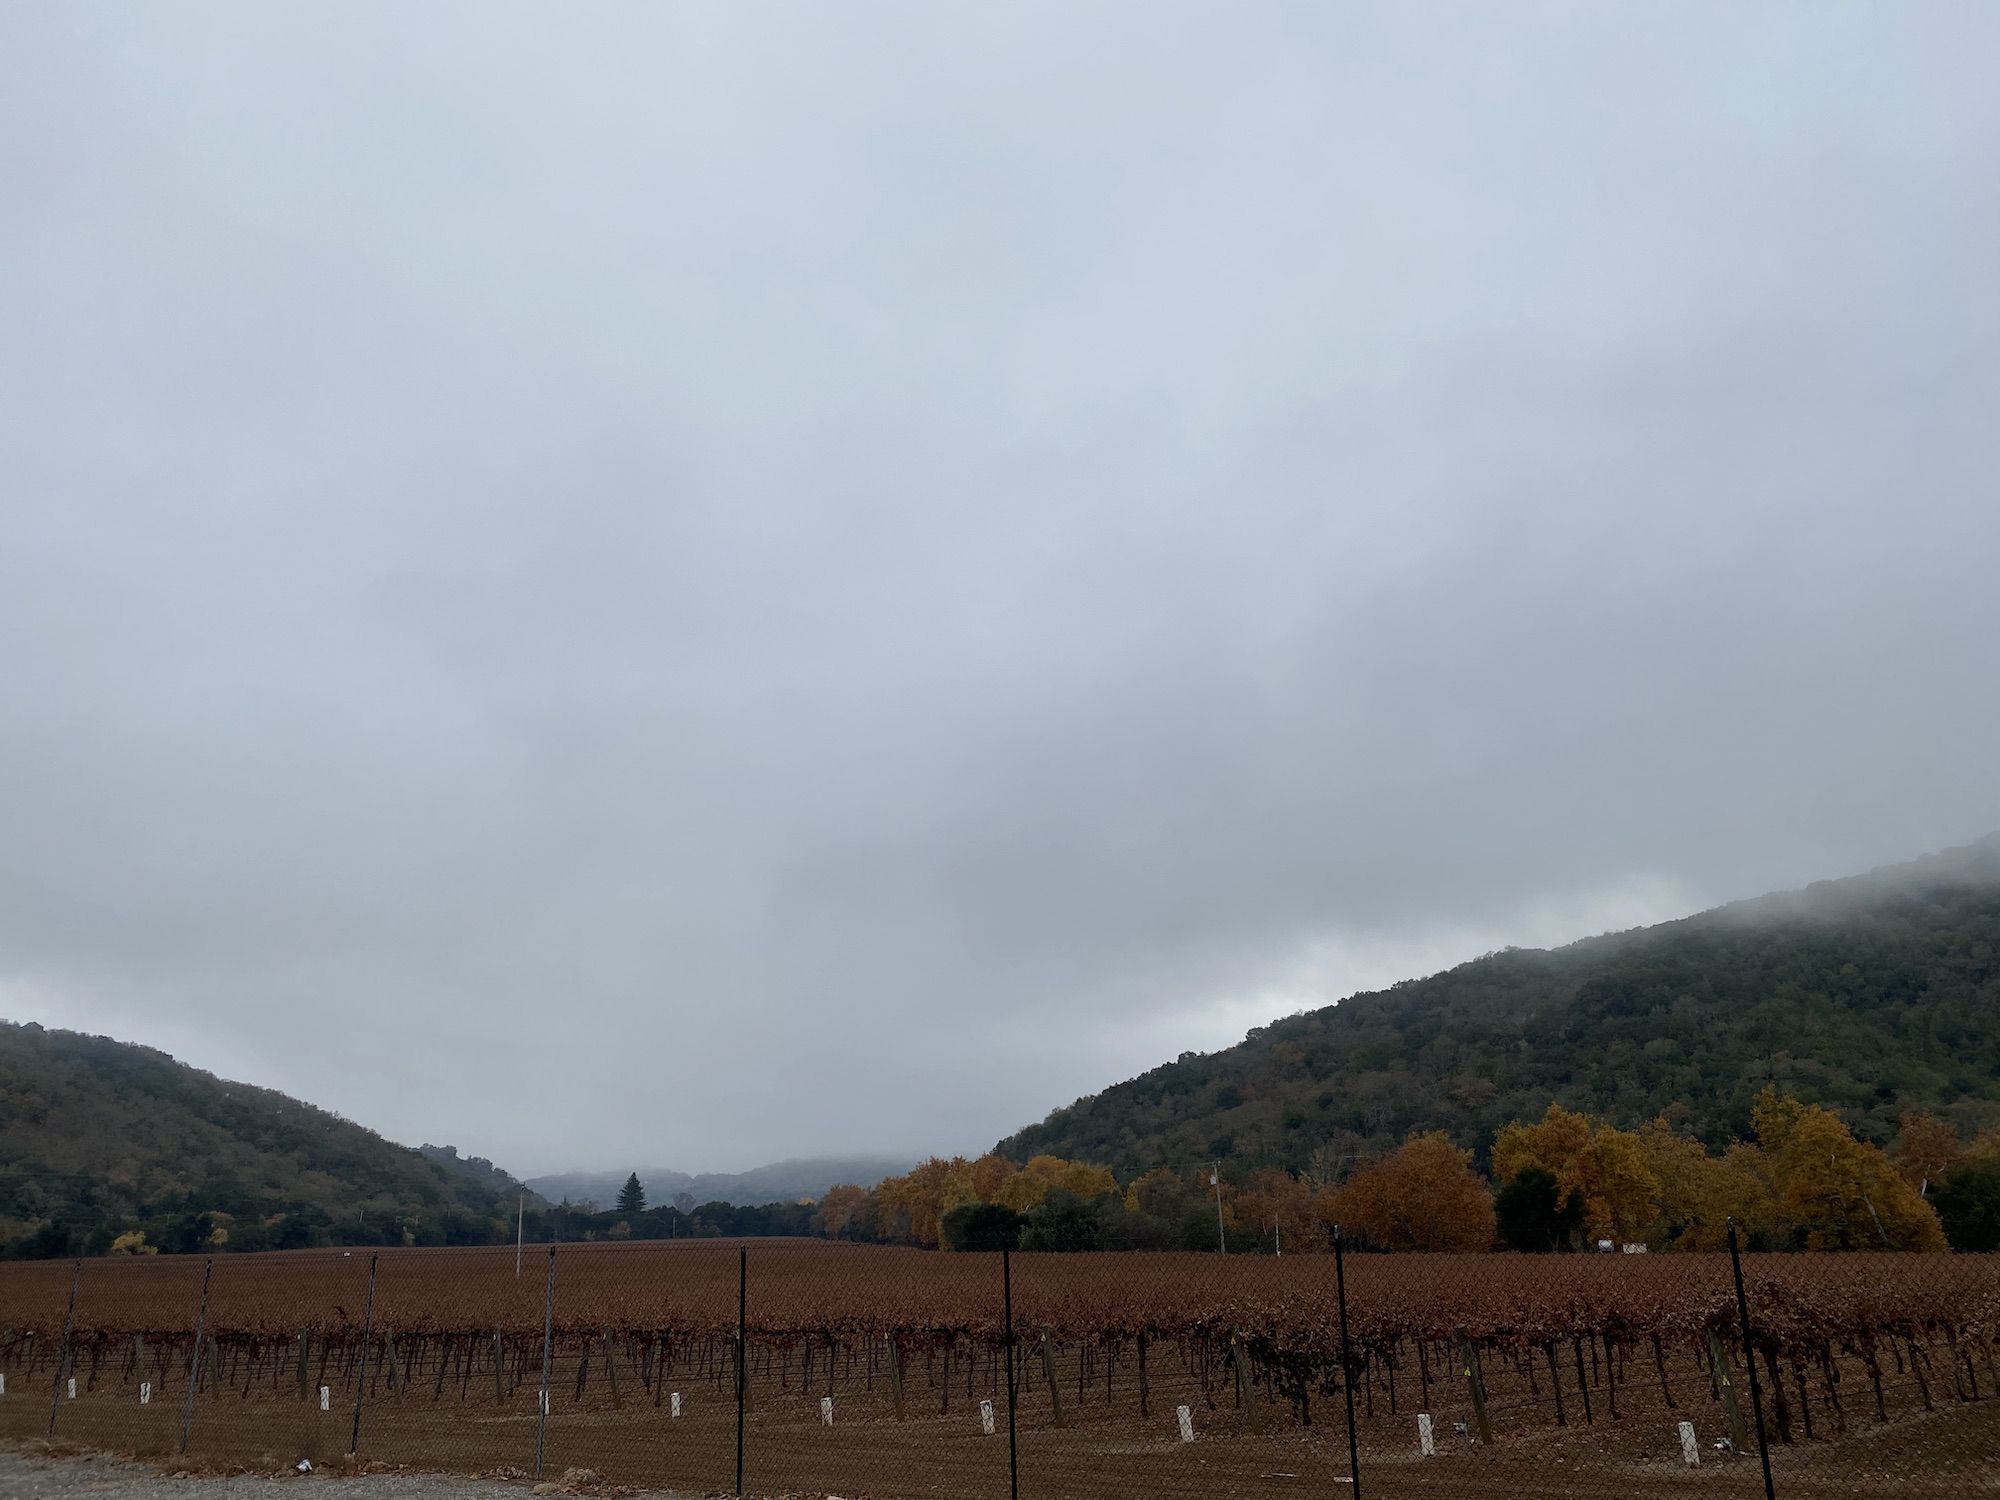 A vineyard with brown leaves under a dark and gloomy sky. 